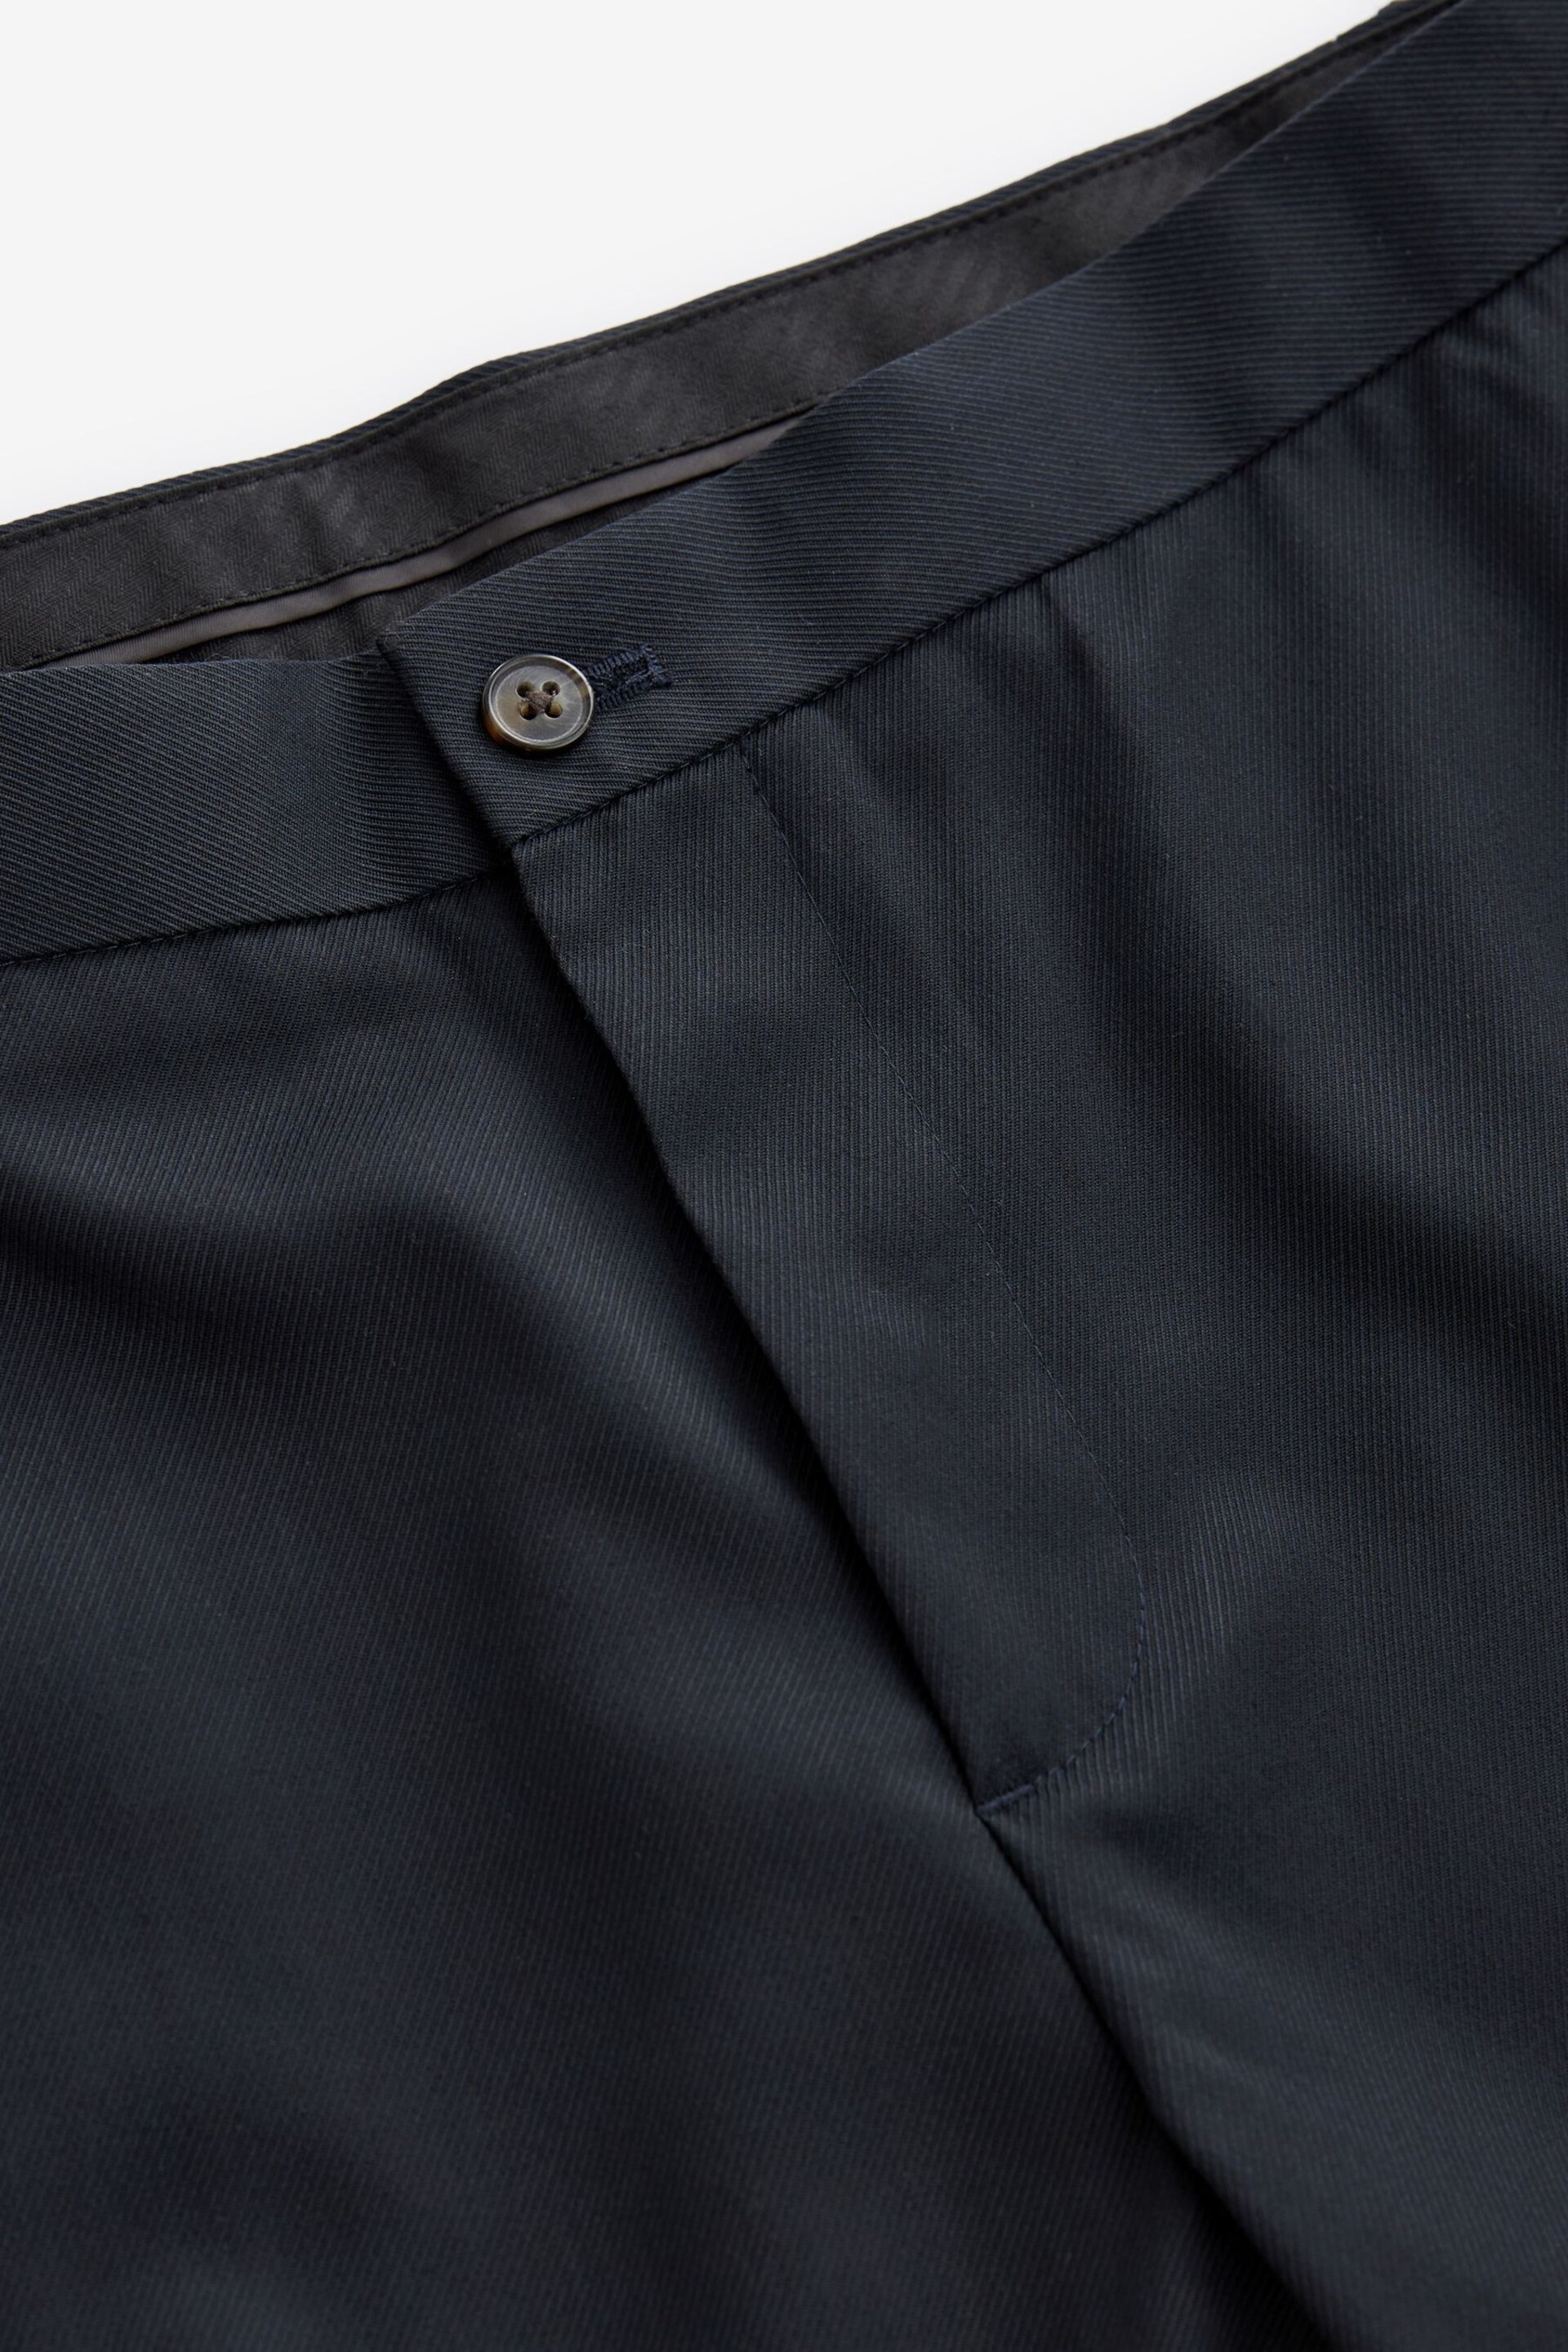 Navy Blue Slim Fit Smart Twill Side Adjuster Trousers - Image 5 of 9